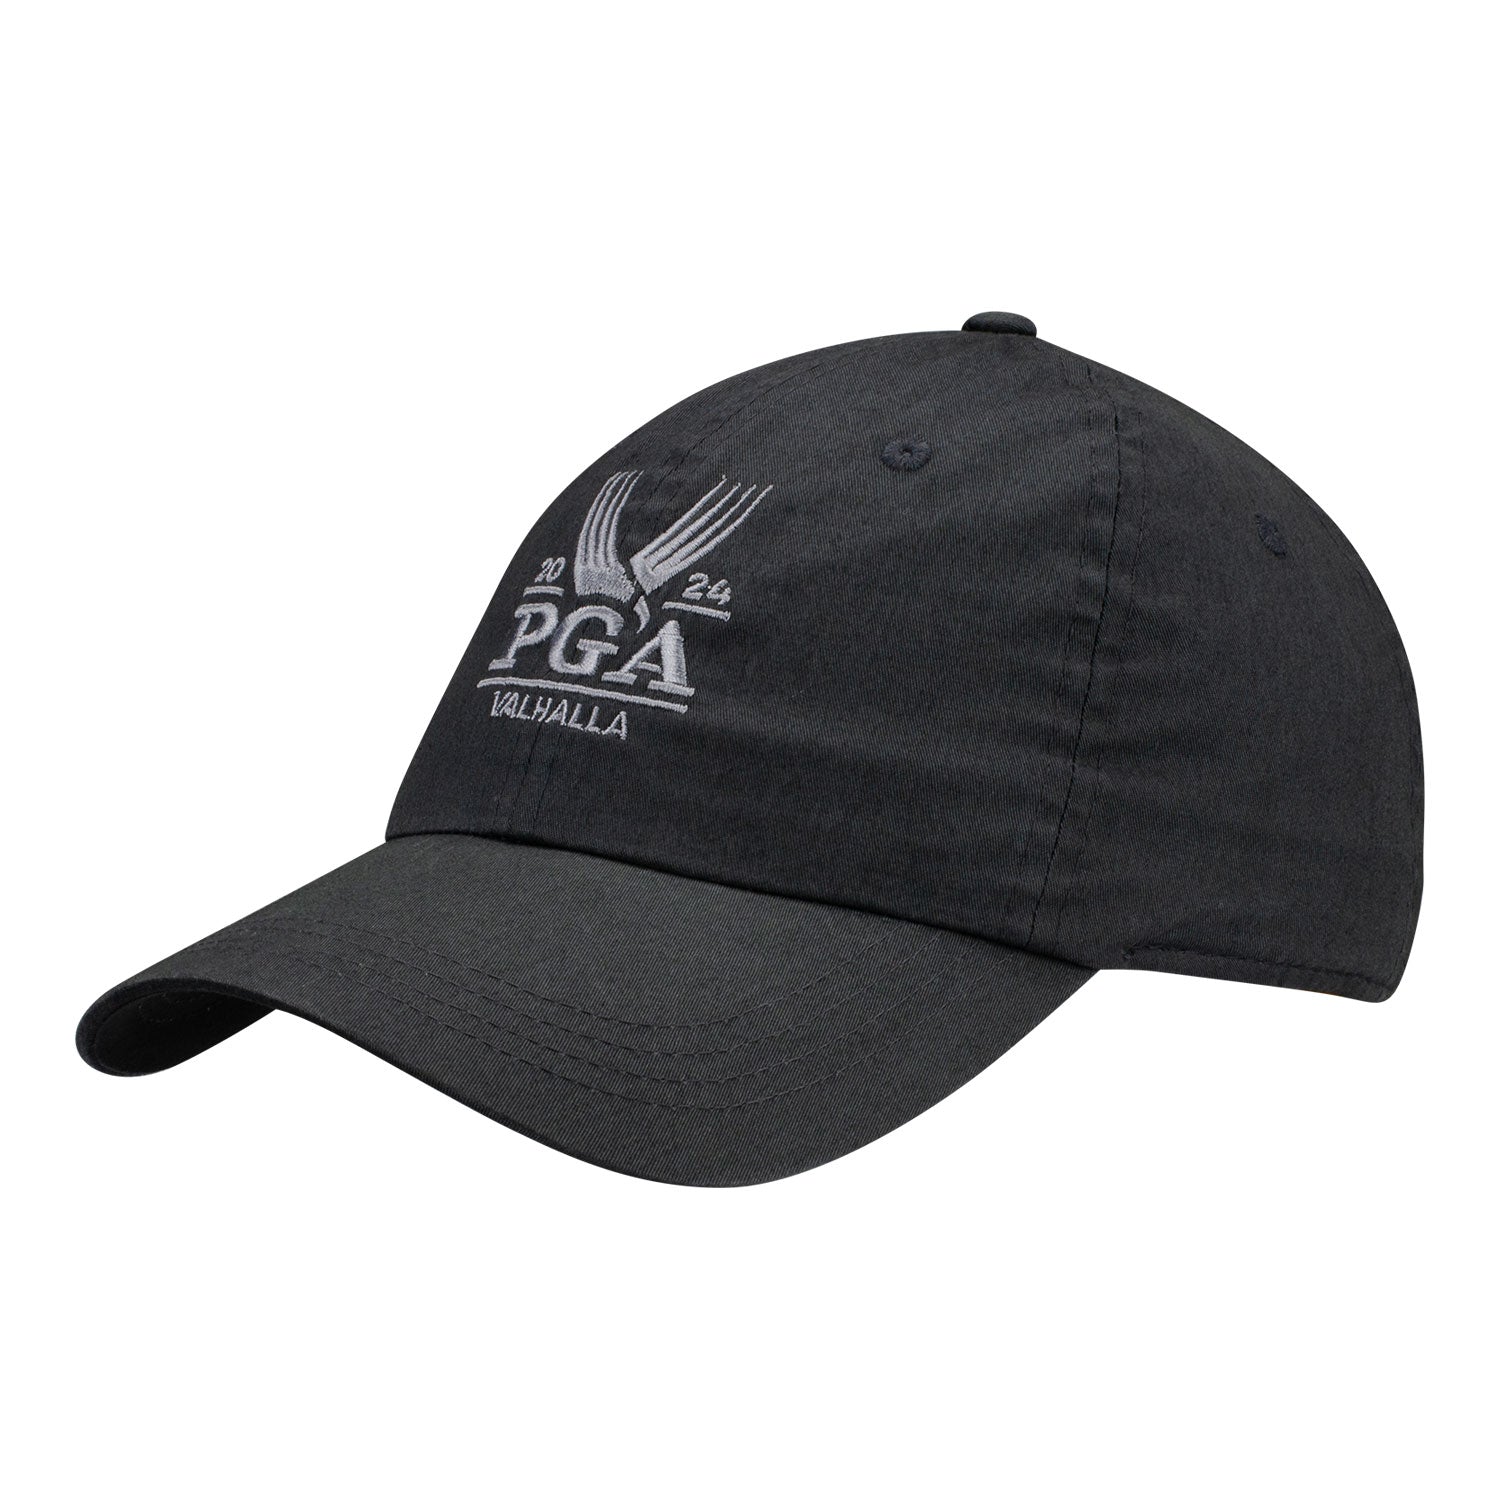 Ahead Corporate Headwear and Accessories